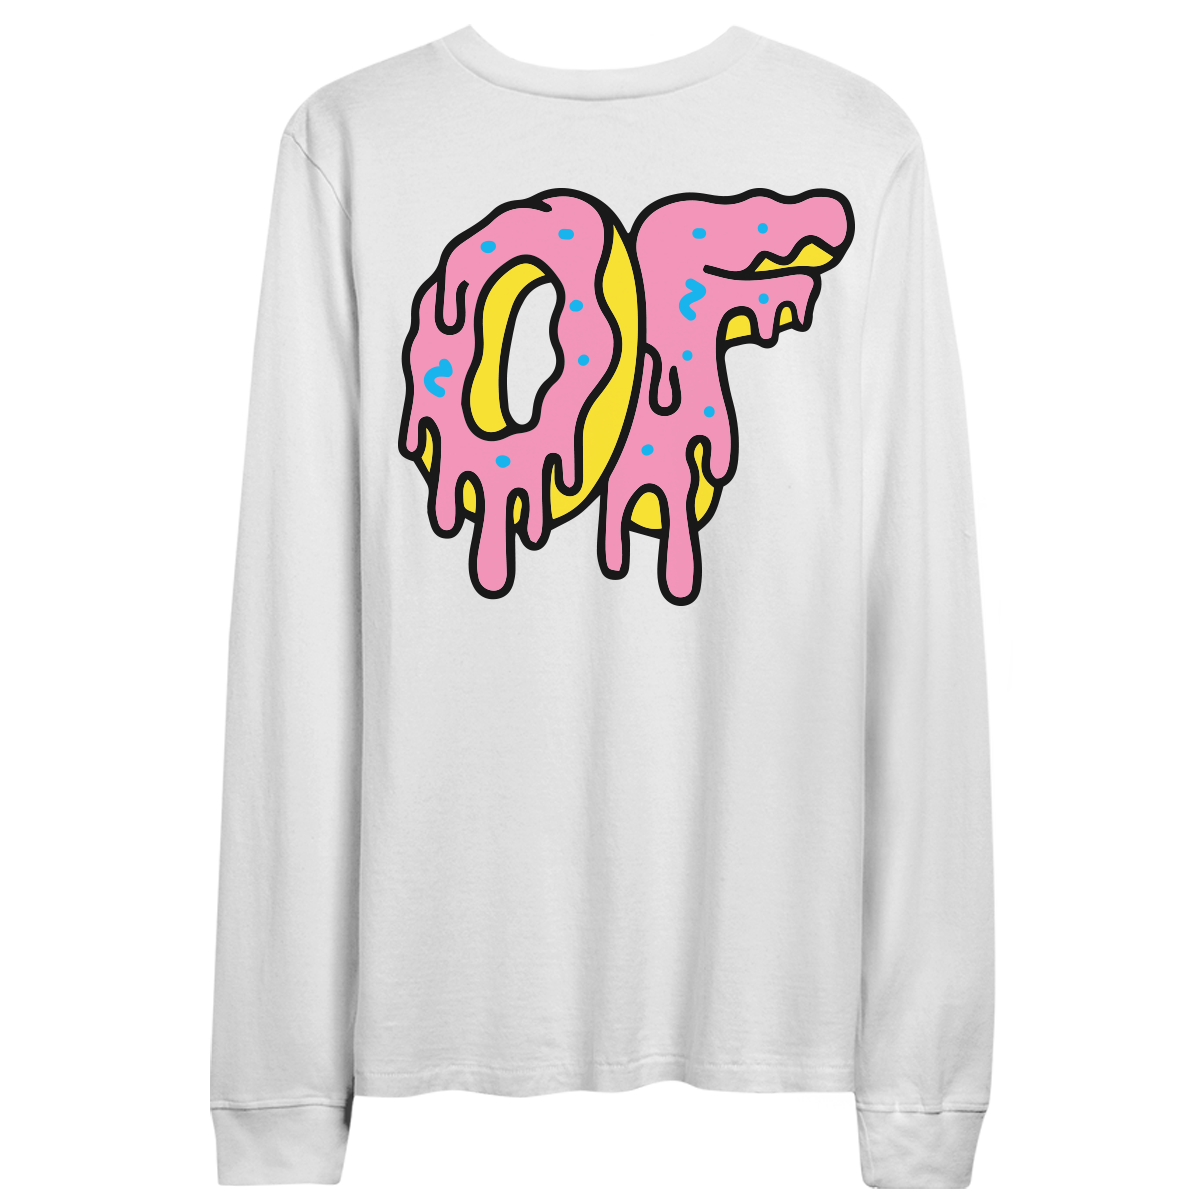 Sellout or Swag? The Runaway Success of Odd Future's Pink Donut